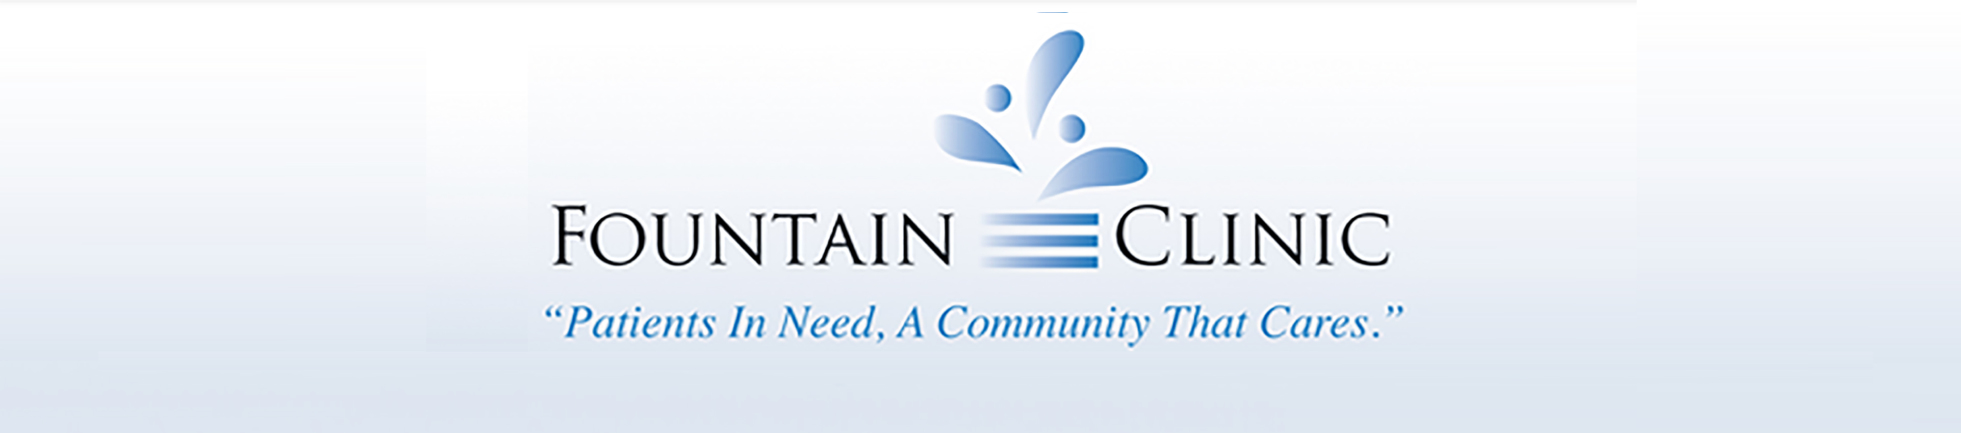 Fountain Clinic - Patients In Need, A Community That Cares